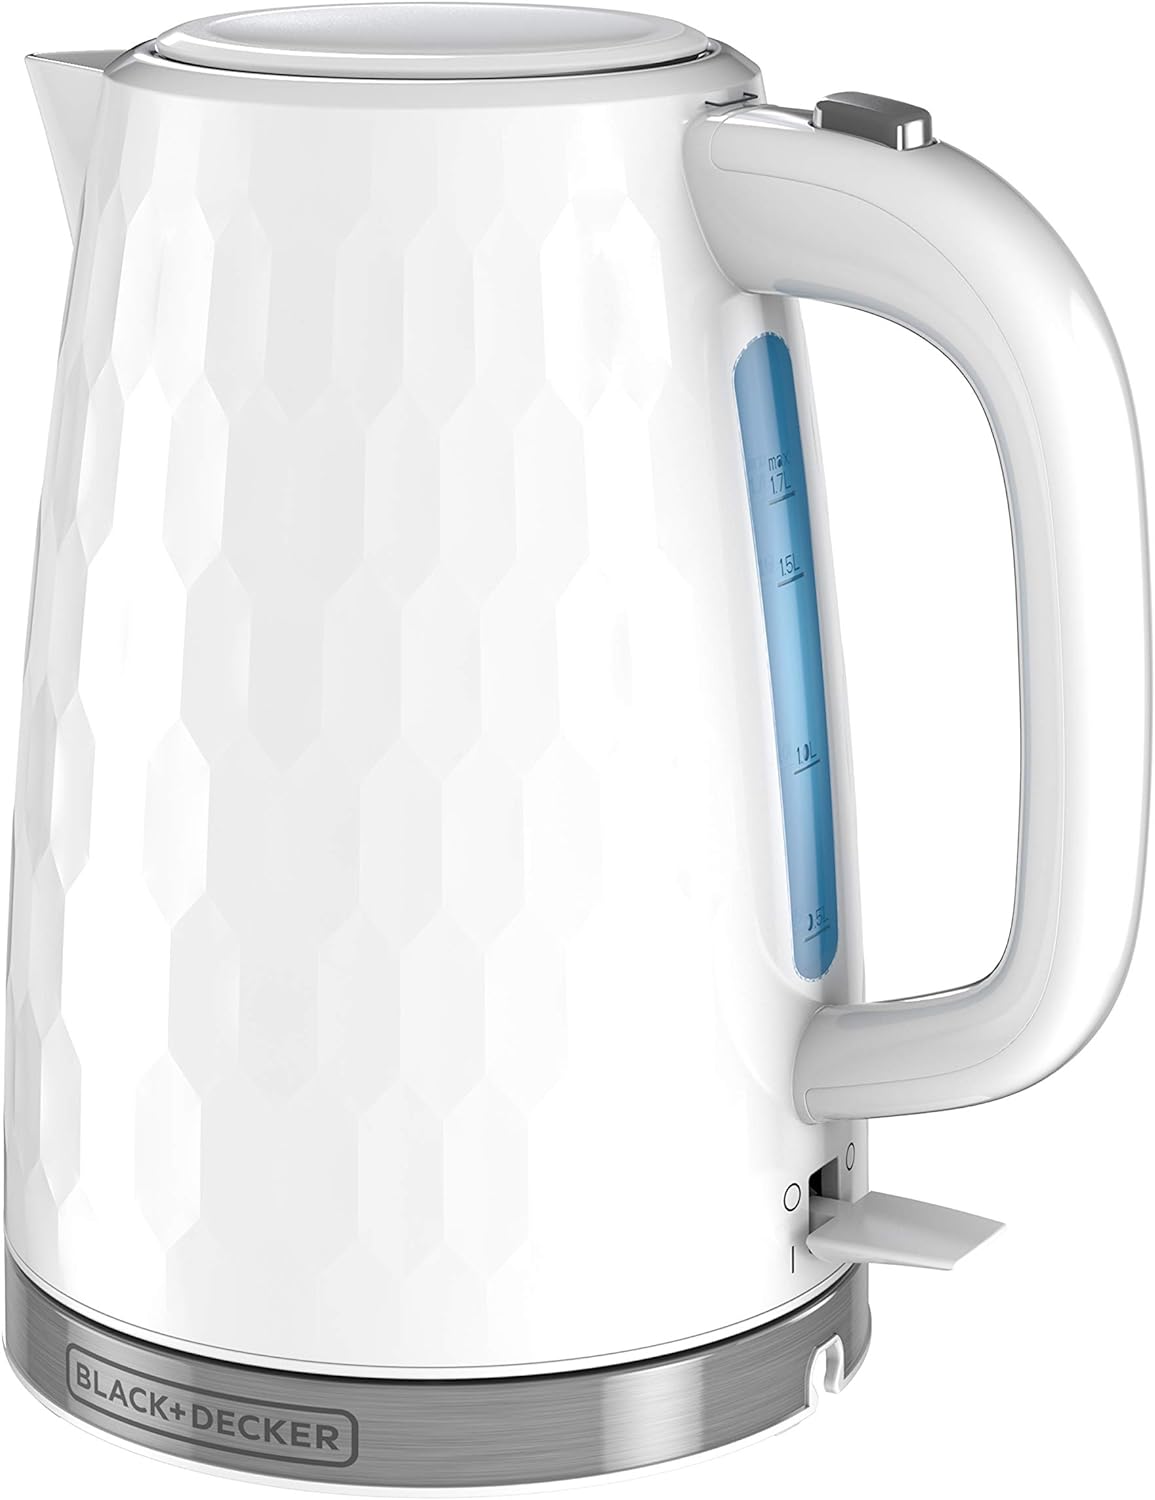 This kettle is quite stylish, goes with all decors. Heats very quickly.